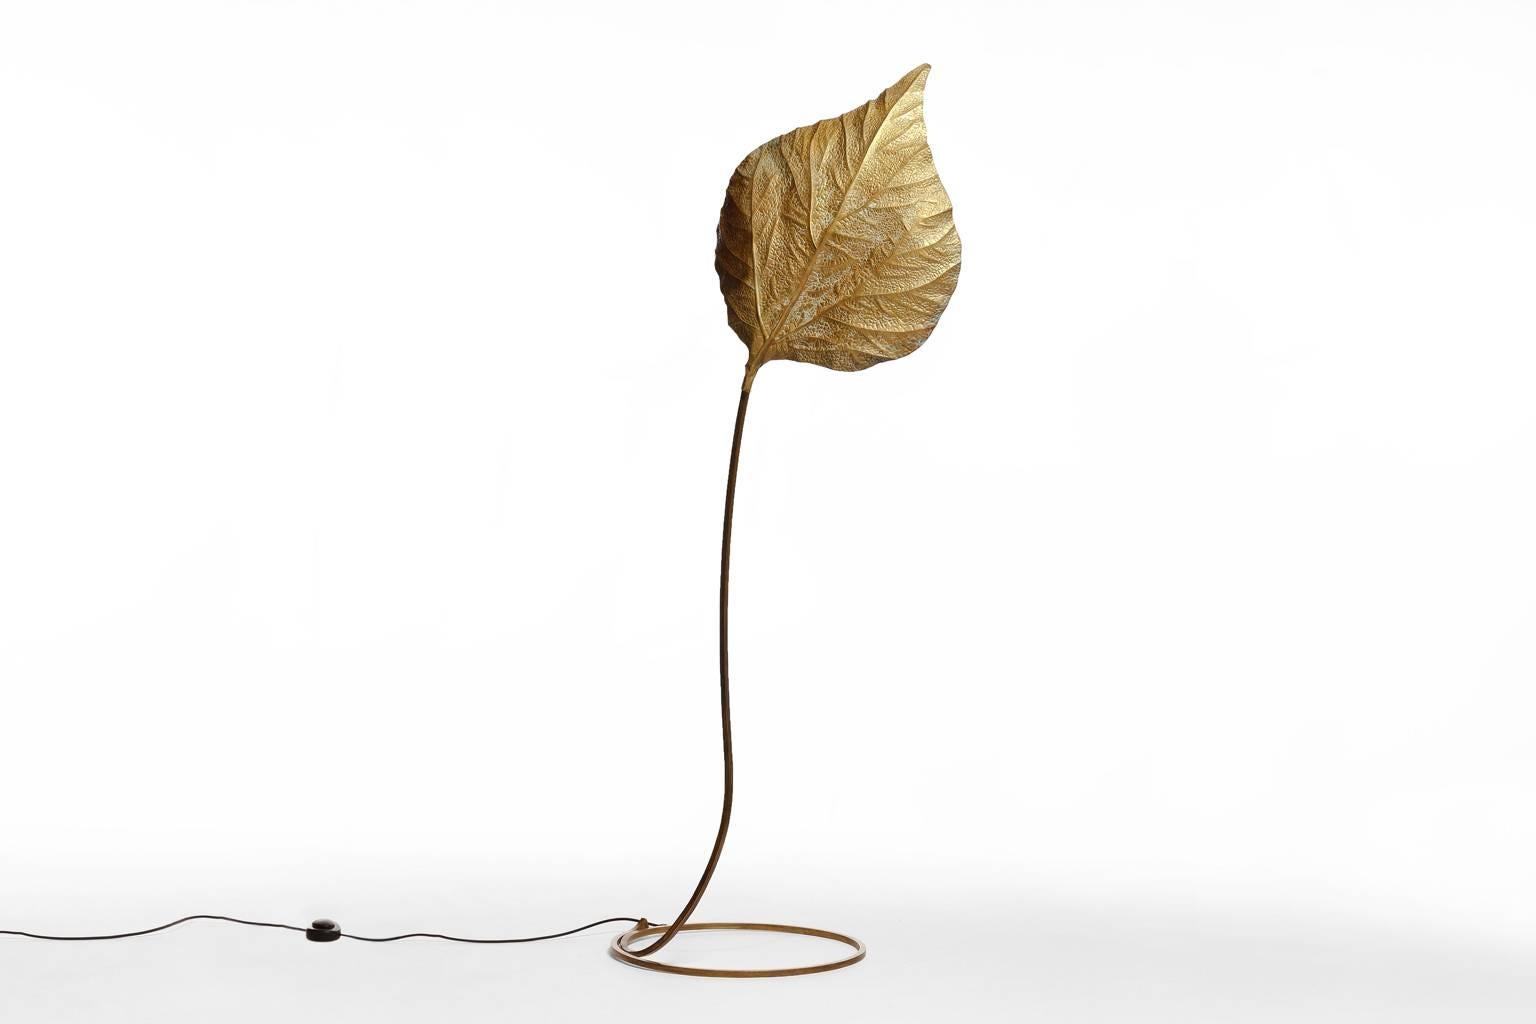 Huge Rhubarb leaf floor lamp by Tommaso Barbi, Italy 1960's. Beautiful Sensual and Elegant forms out of hammered brass. All handmade by the best Italian craftsmen. Provides a nice warm light due to the hammered brass surface.
In excellent condition